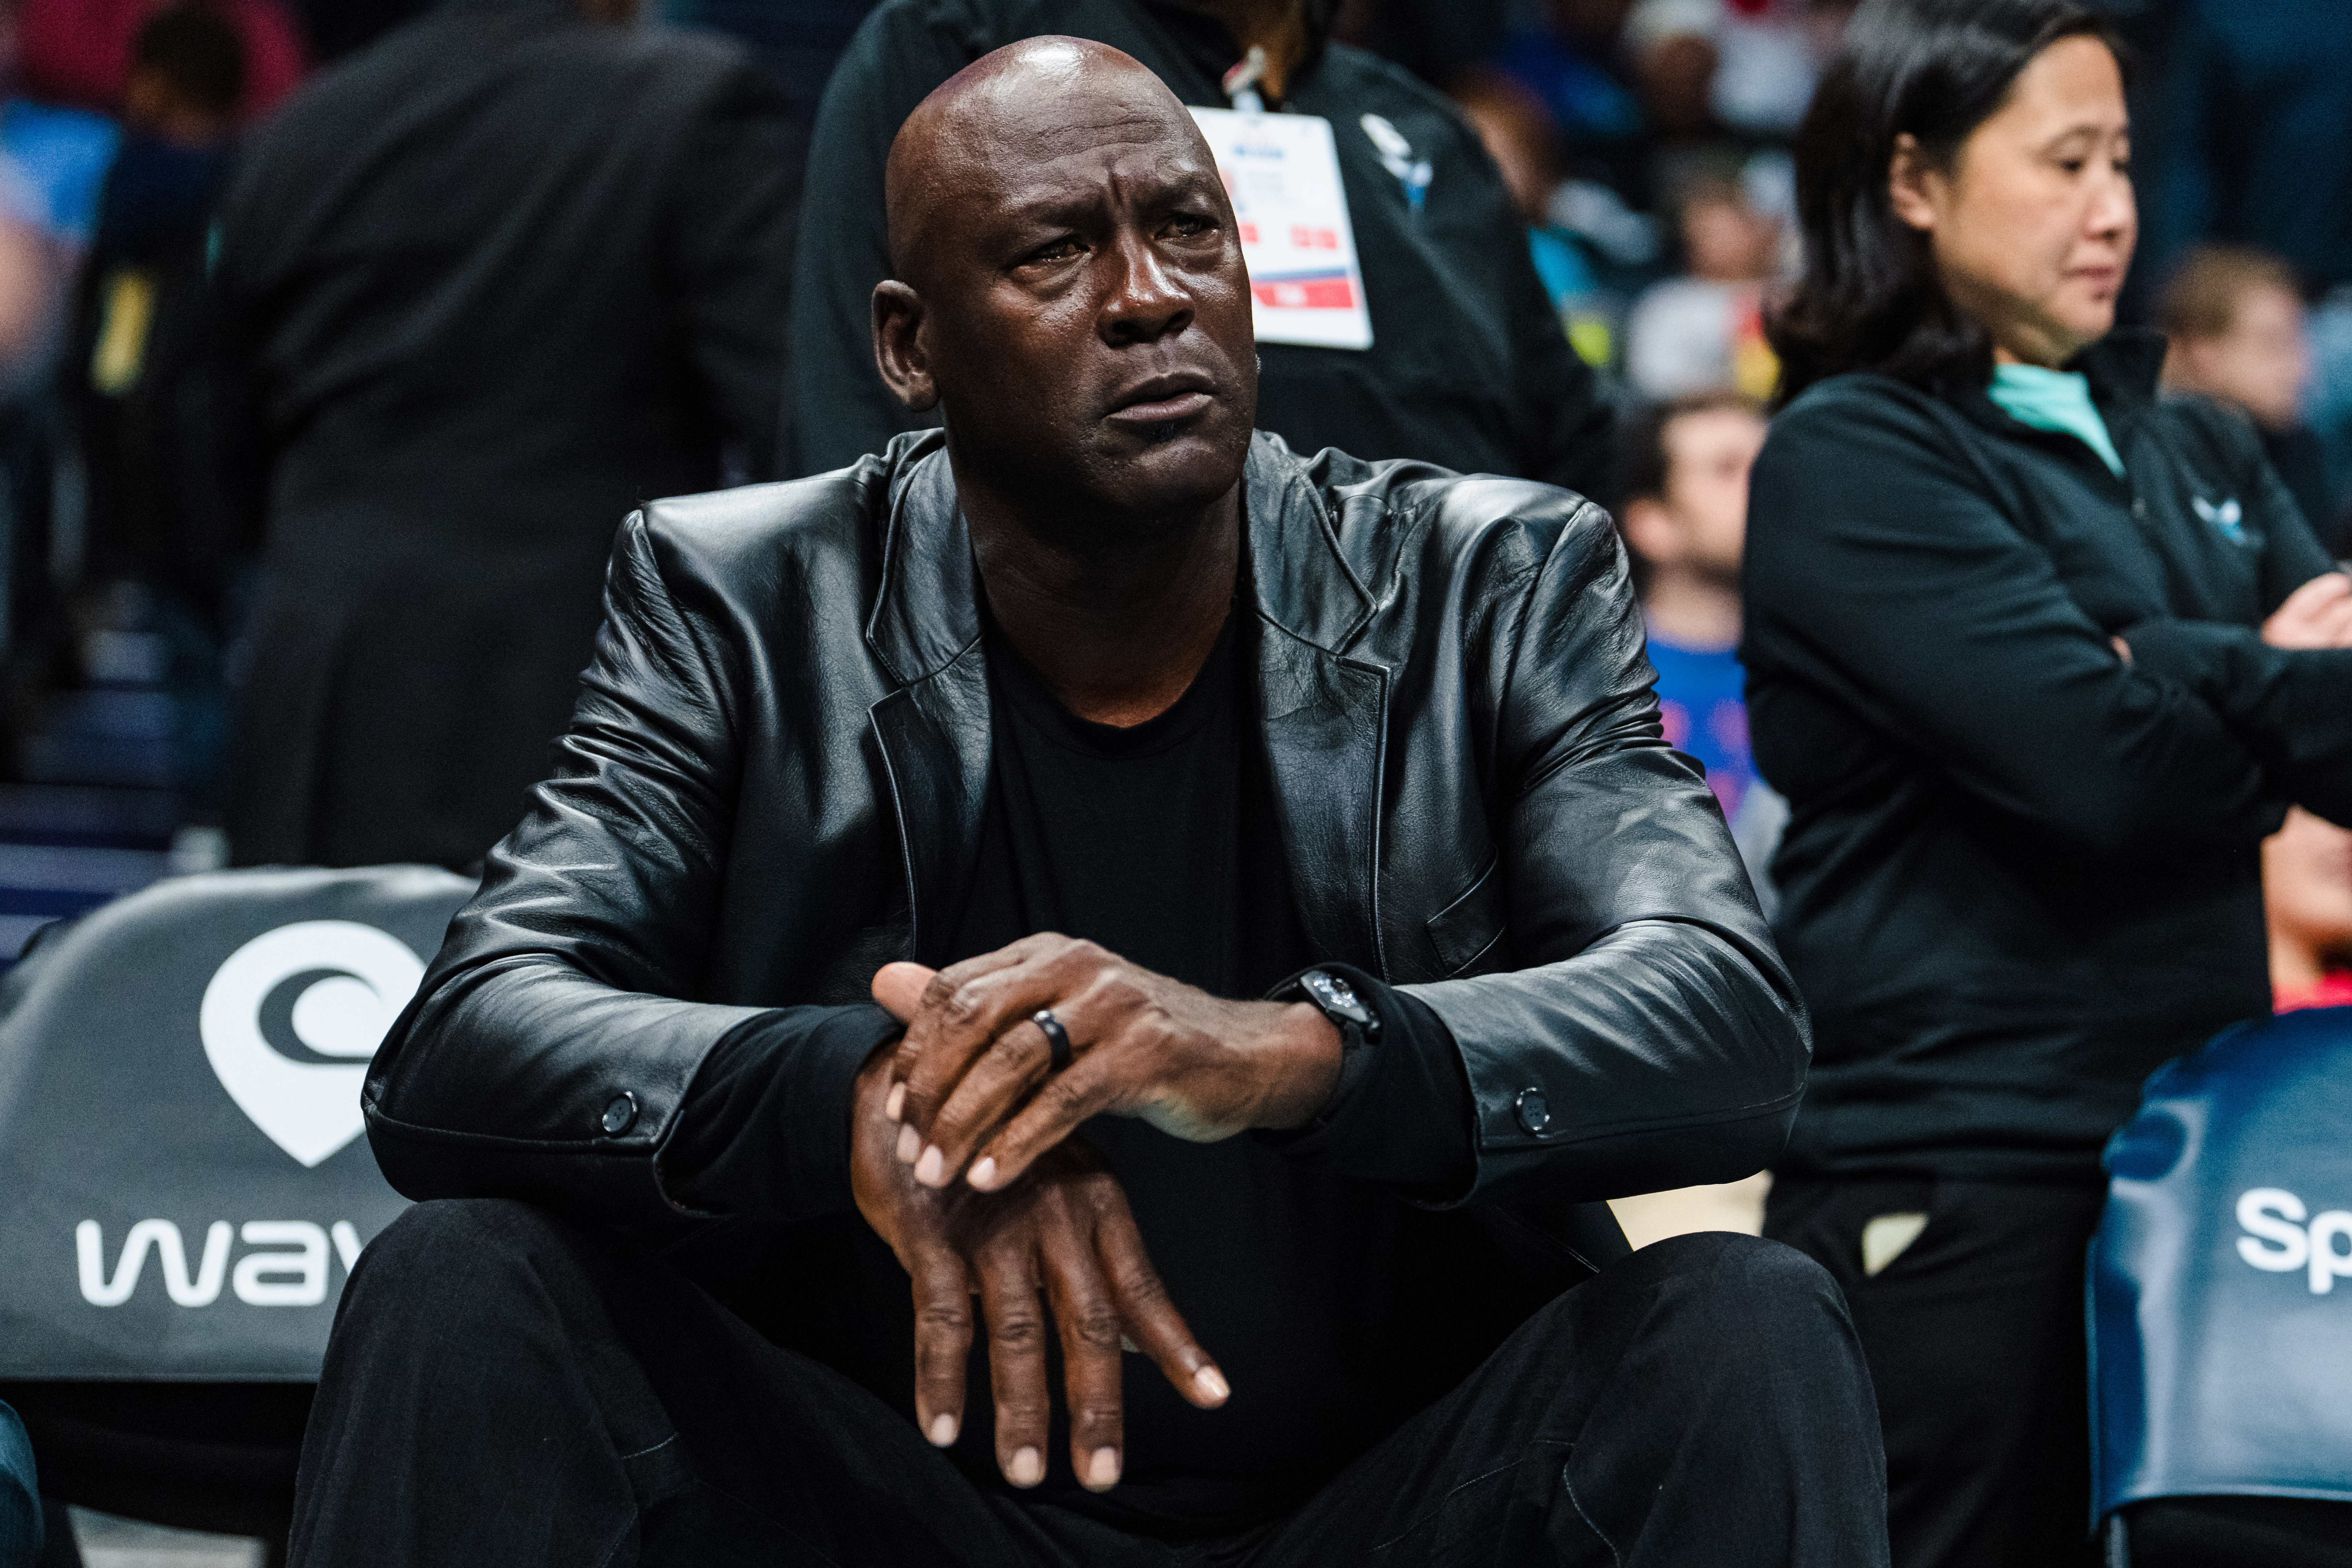 CHARLOTTE, NORTH CAROLINA - MARCH 03: Charlotte Hornets owner Michael Jordan looks on in the fourth quarter during their game against the Orlando Magic at Spectrum Center on March 03, 2023 in Charlotte, North Carolina. NOTE TO USER: User expressly acknowledges and agrees that, by downloading and or using this photograph, User is consenting to the terms and conditions of the Getty Images License Agreement. (Photo by Jacob Kupferman/Getty Images)